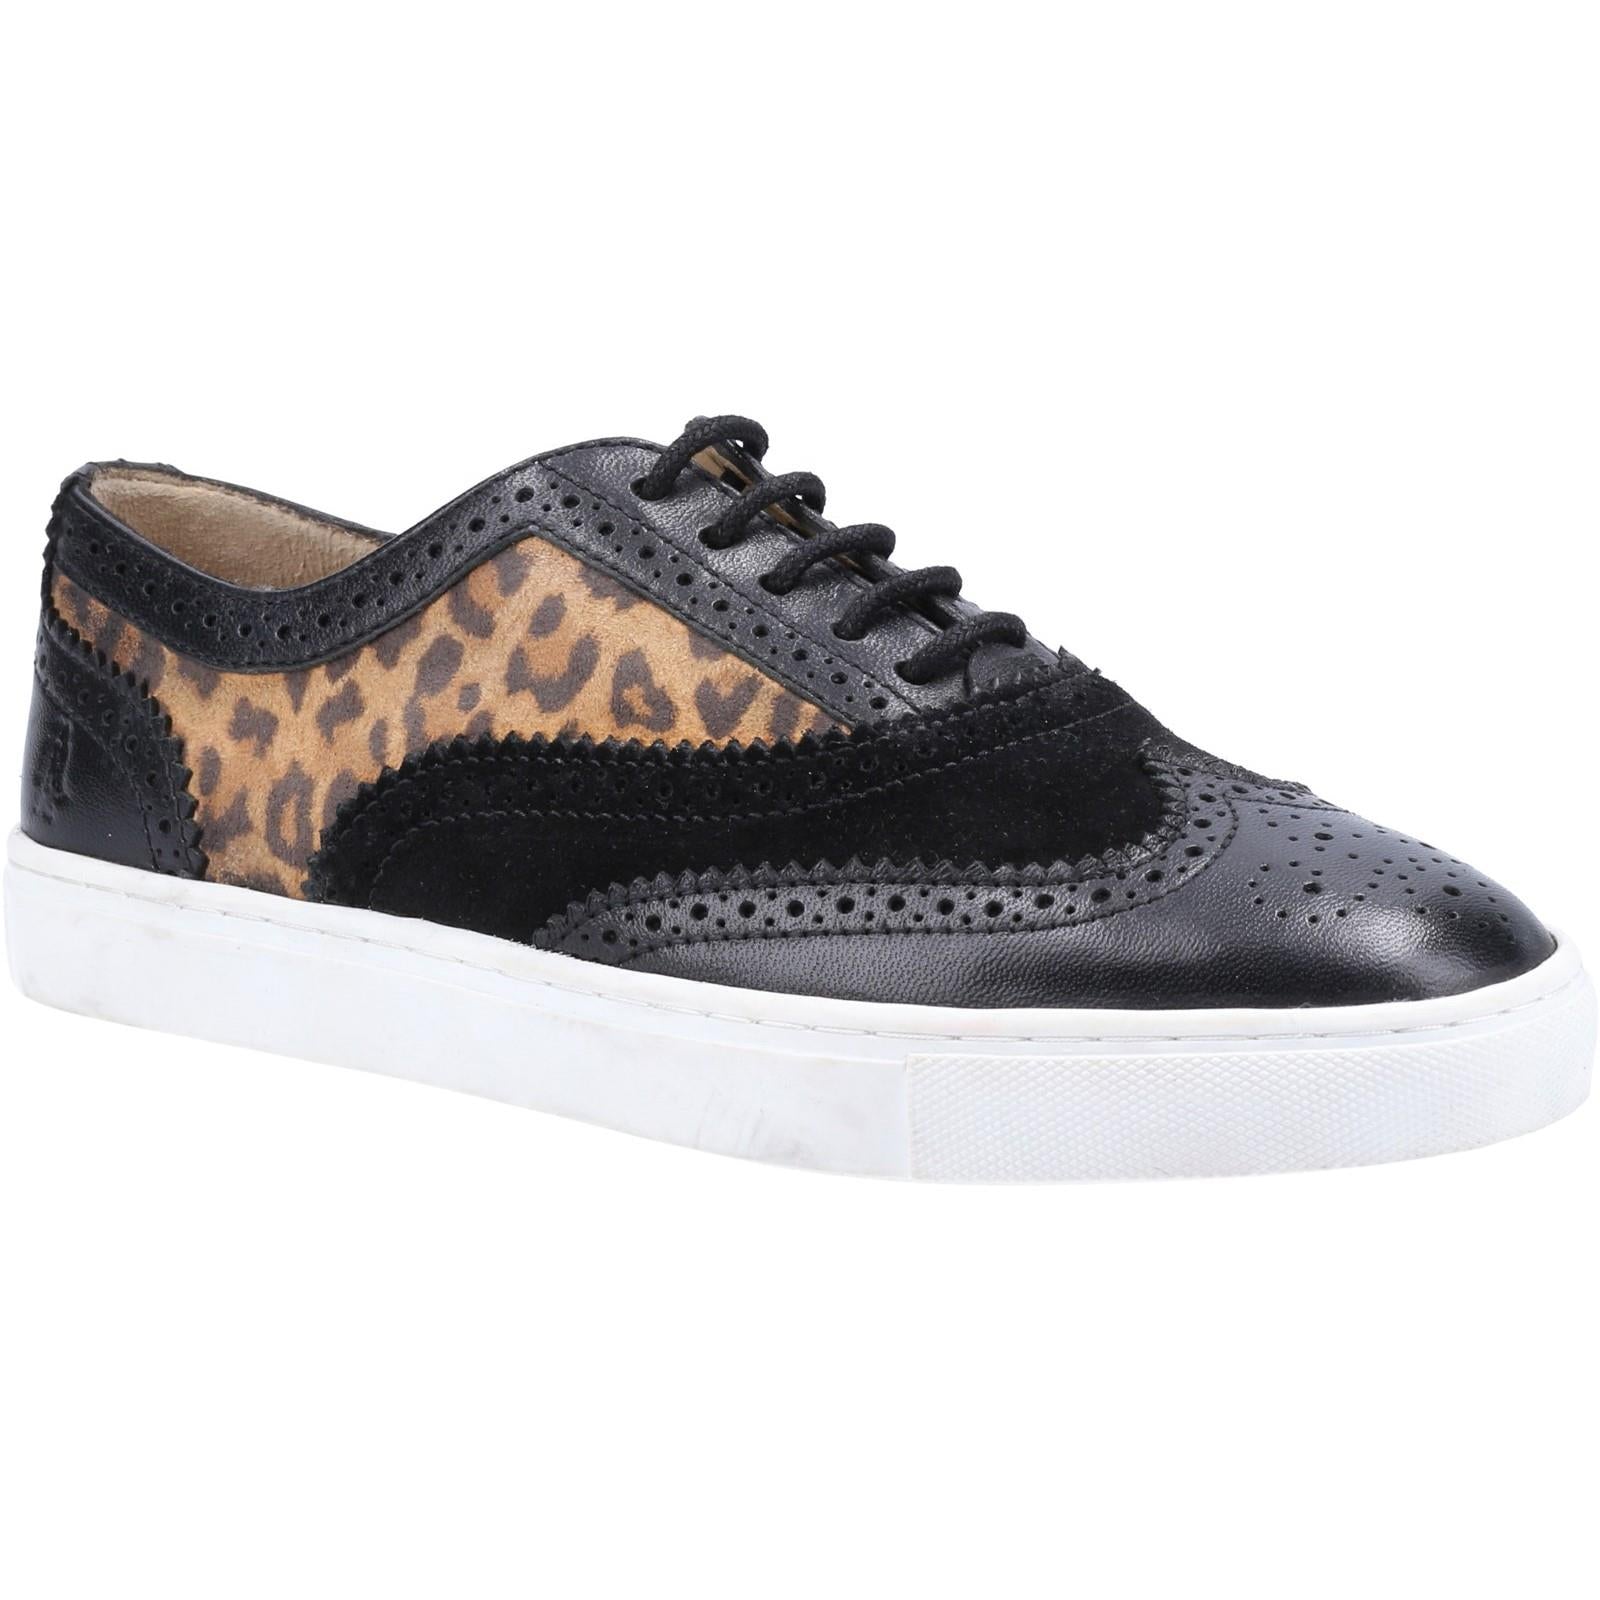 Hush Puppies Tammy black leopard leather ladies lace up brogue trainers shoes